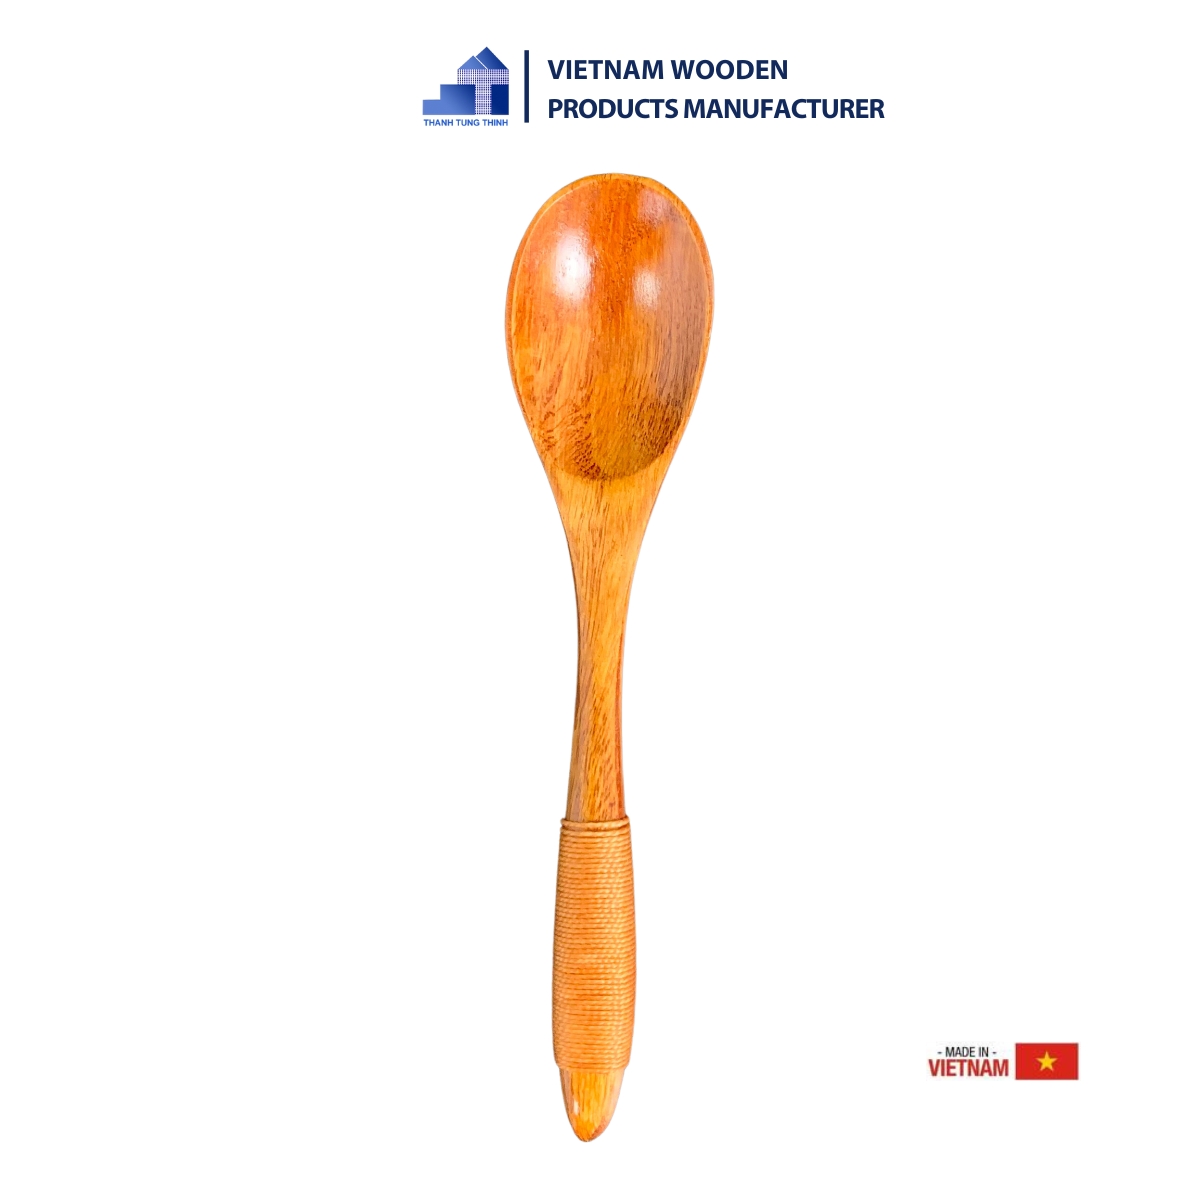 The high-quality, simple wooden spoon is made by a wood manufacturer.